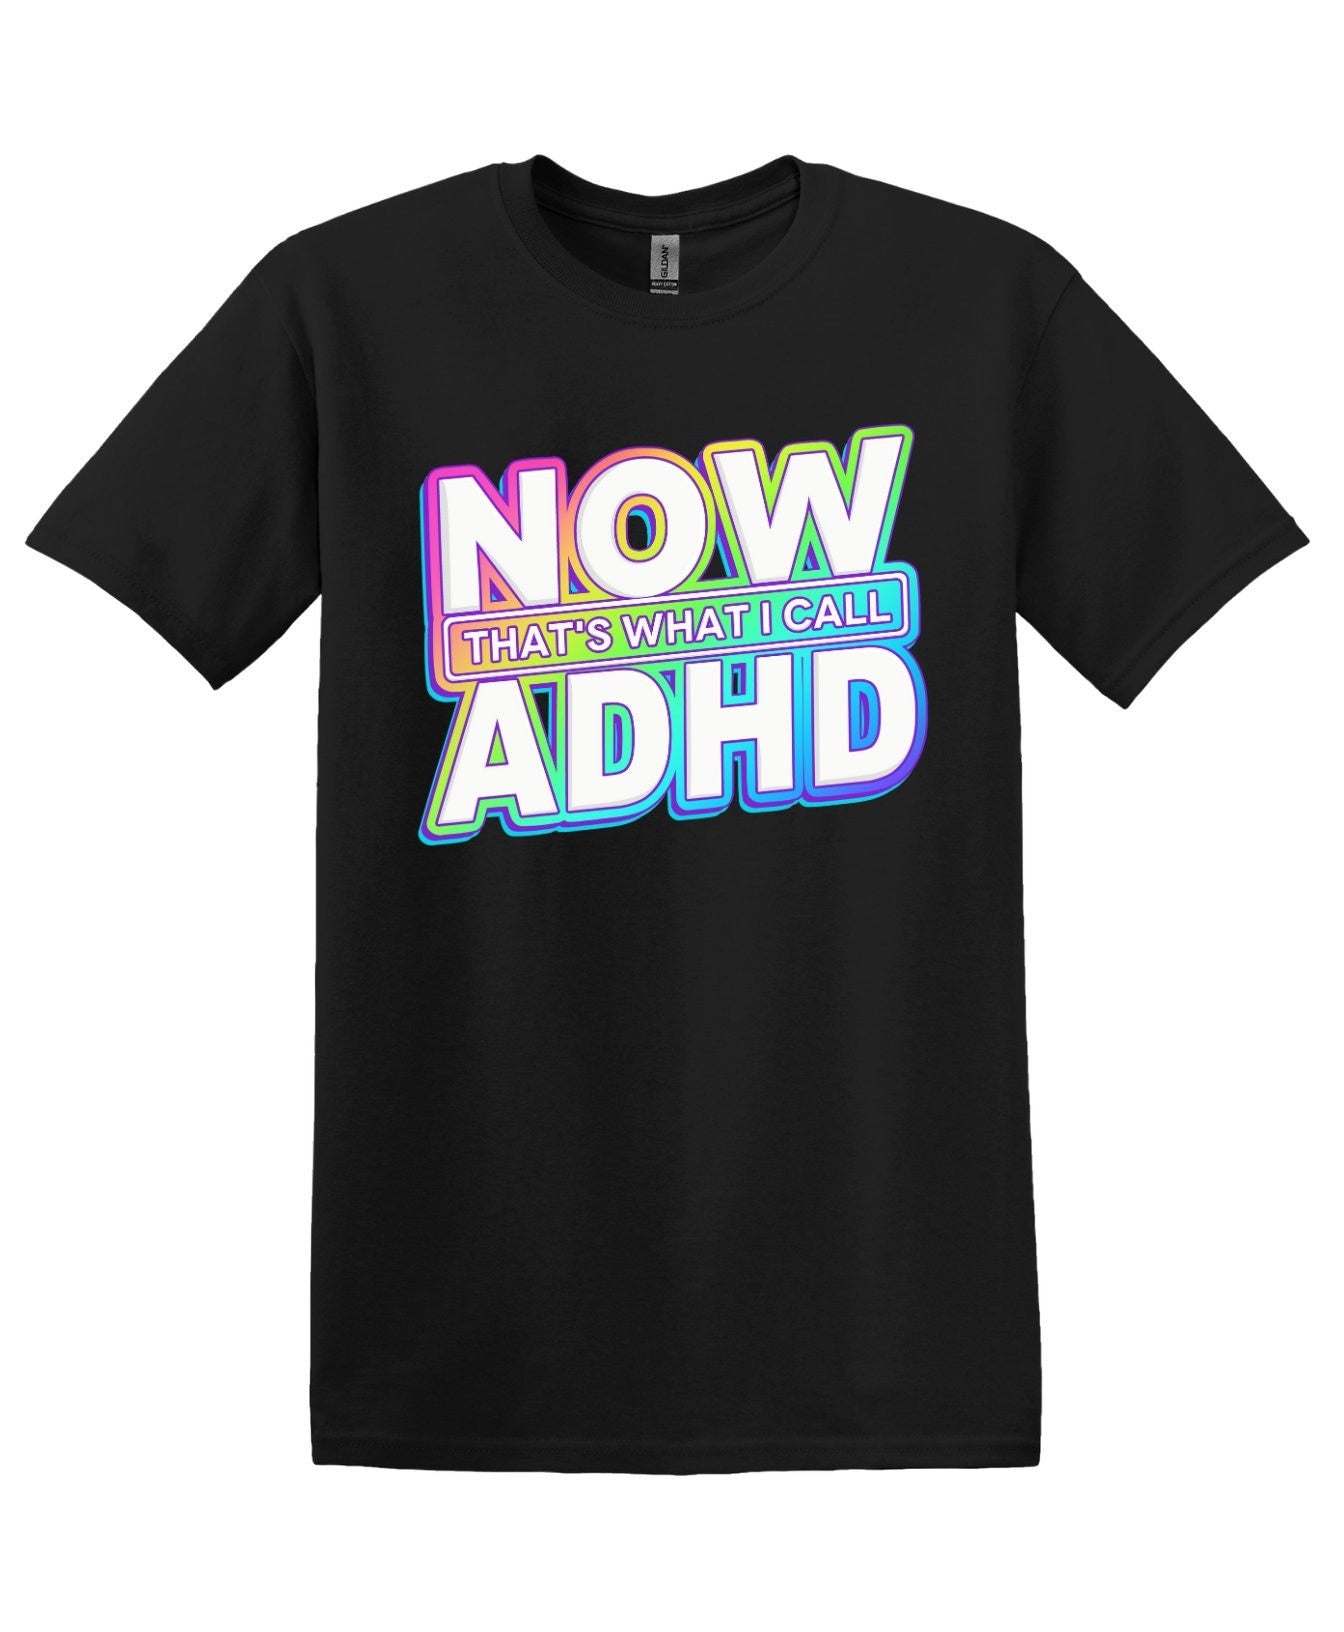 Now That's What I Call ADHD, Funny Cotton T-Shirt, Adult Tee